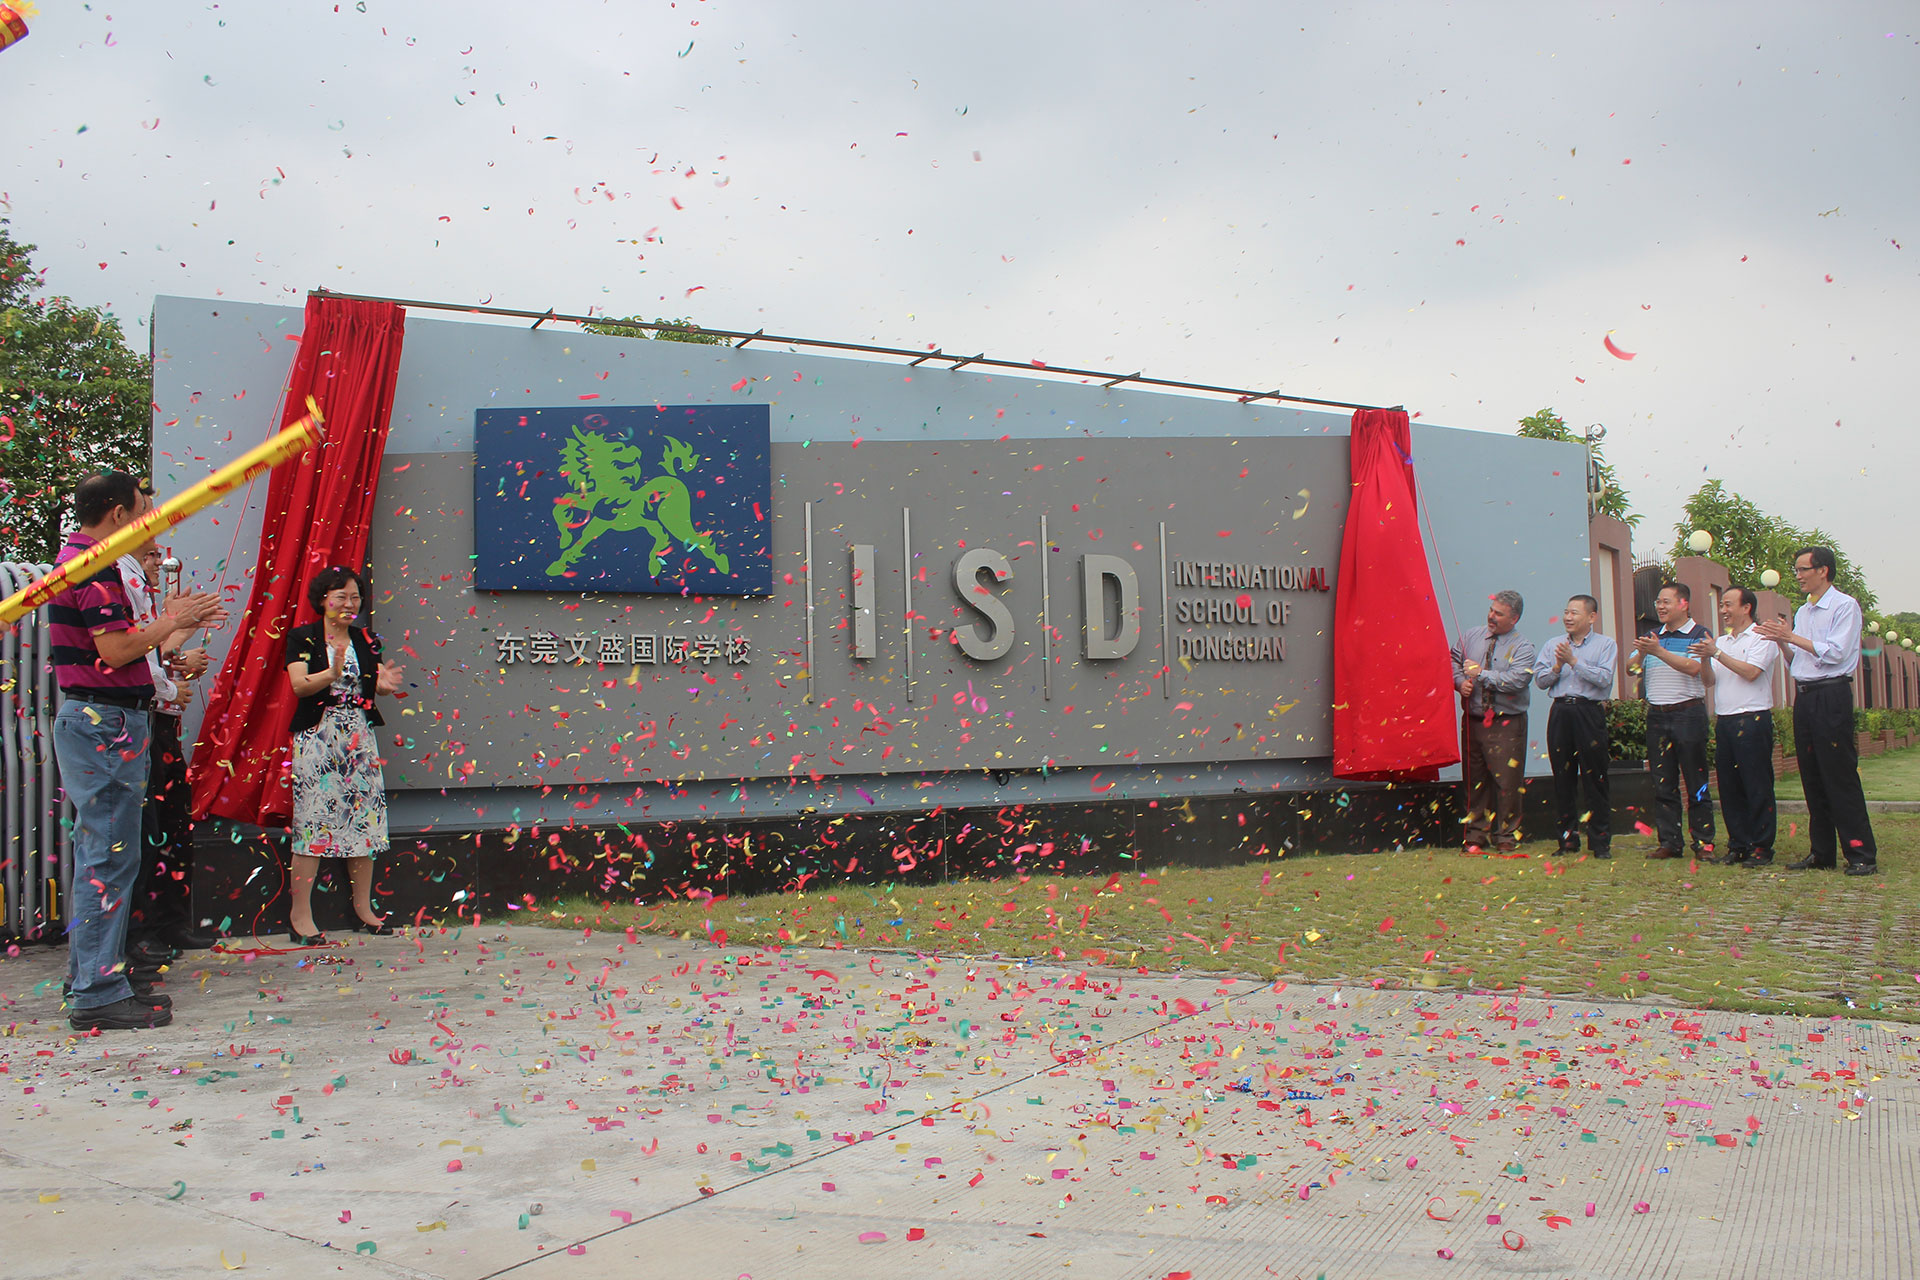 Inaugural year of ISD—the grand opening